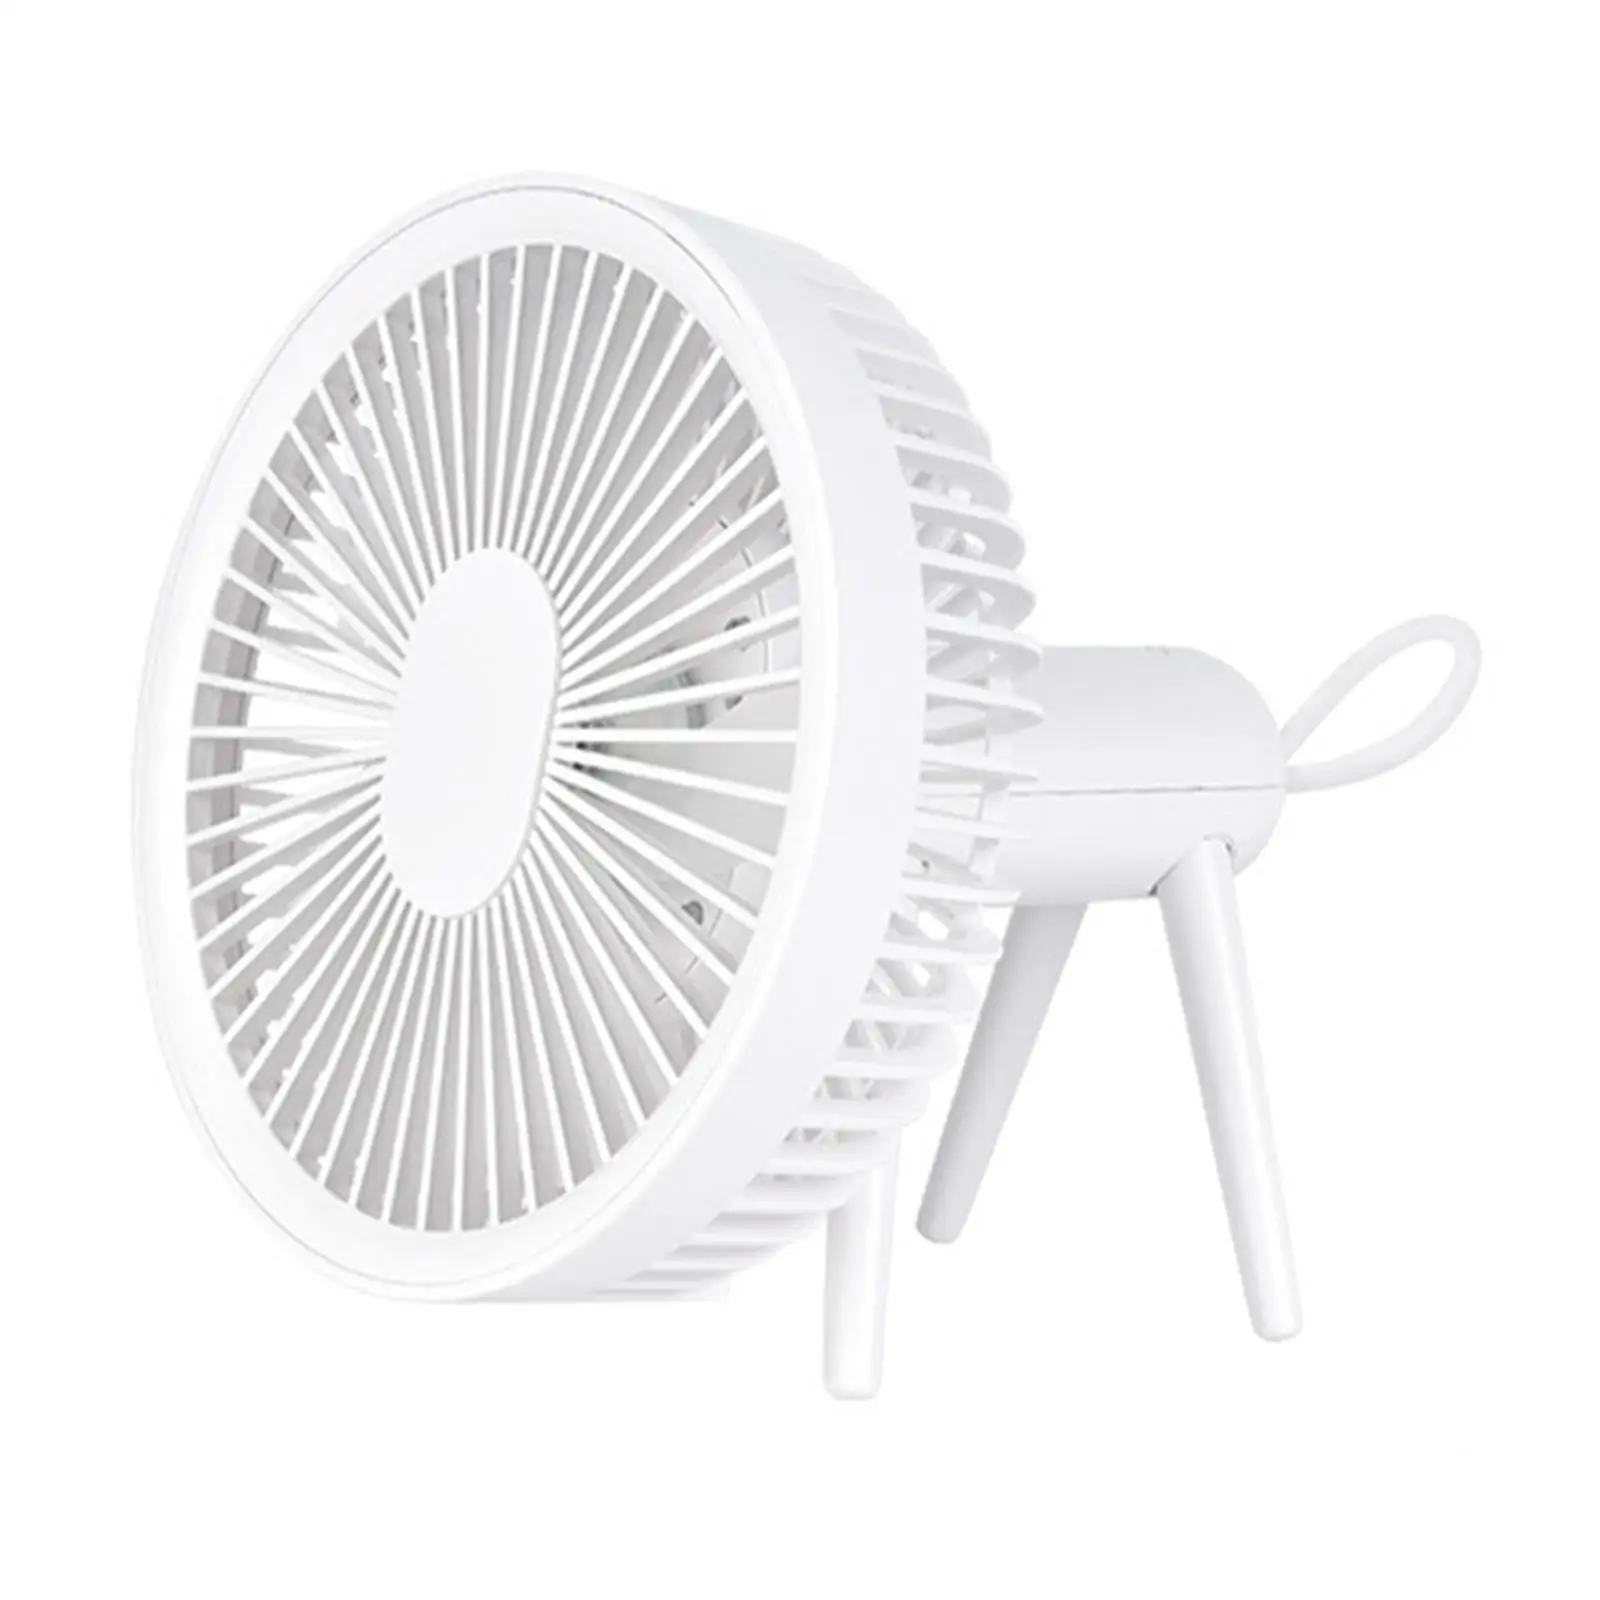 Personal Table Cooling Fan with Hook Quiet with Removable Bracket 4 Speeds USB Desk Fans for Hiking Outdoor Indoor Backpacking